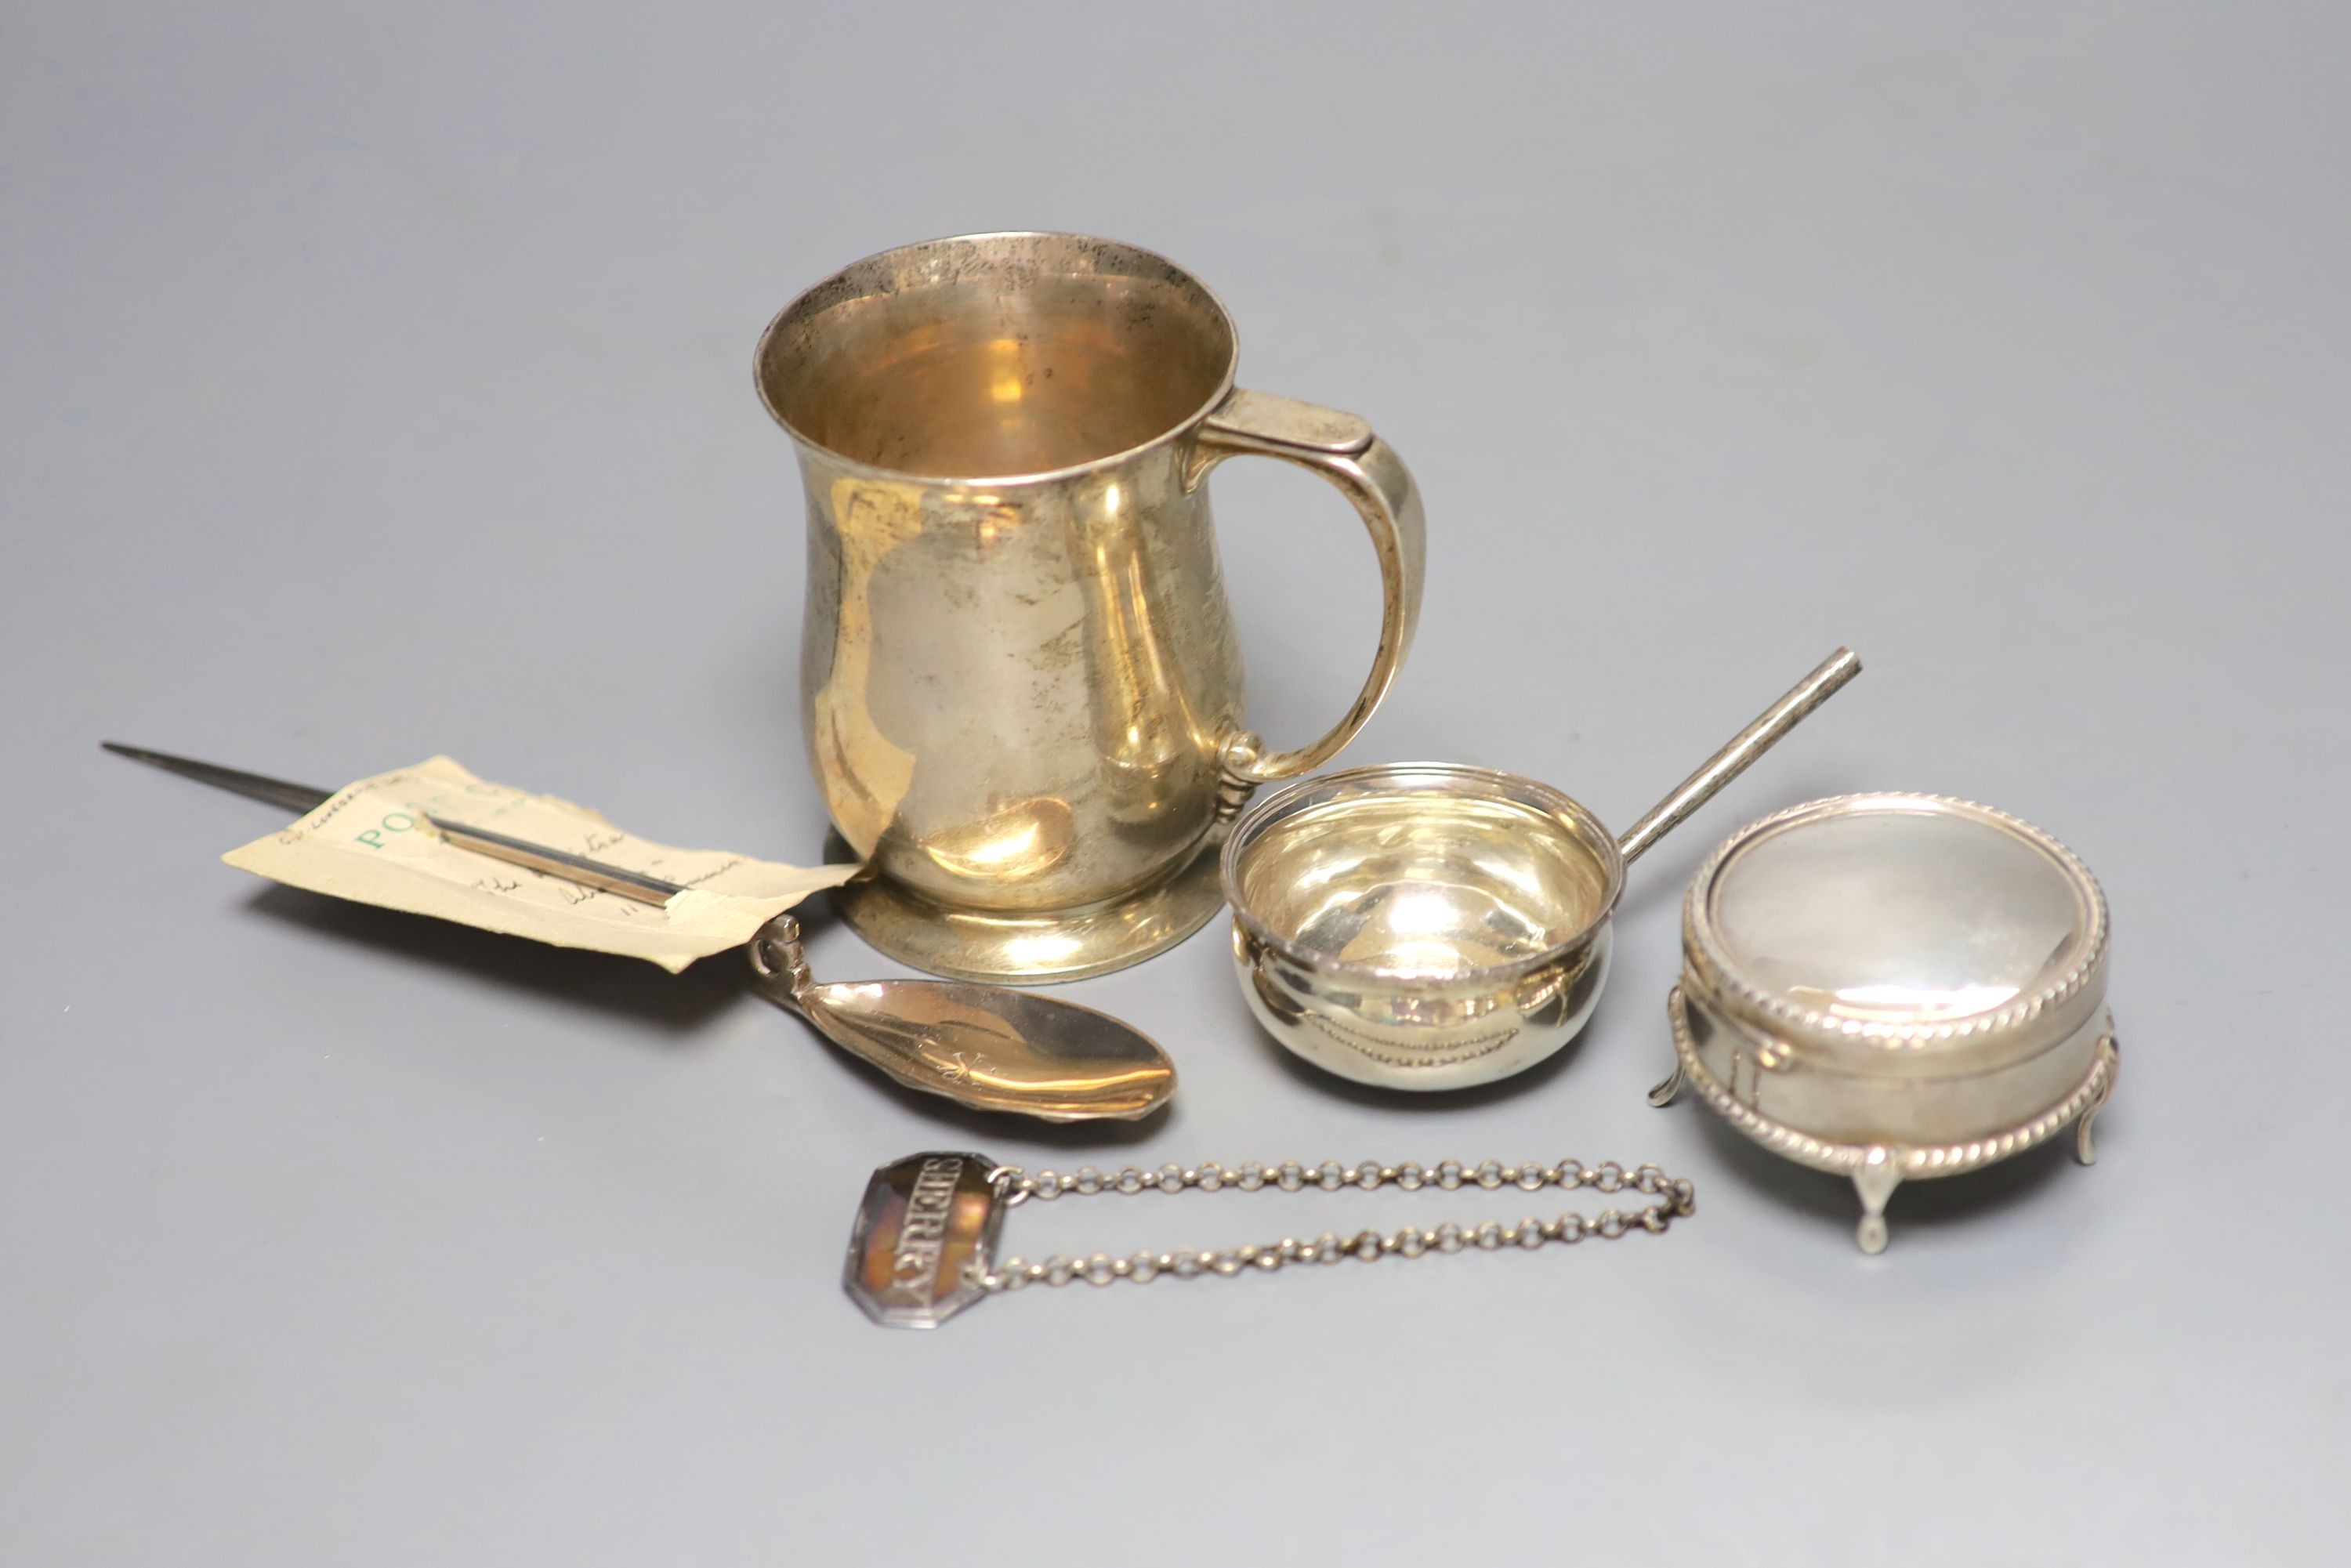 A George V silver mug, a white metal toddy ladle bowl, an Edwardian silver trinket box, a silver reproduction Roman spoon and a George III 'Sherry' label.